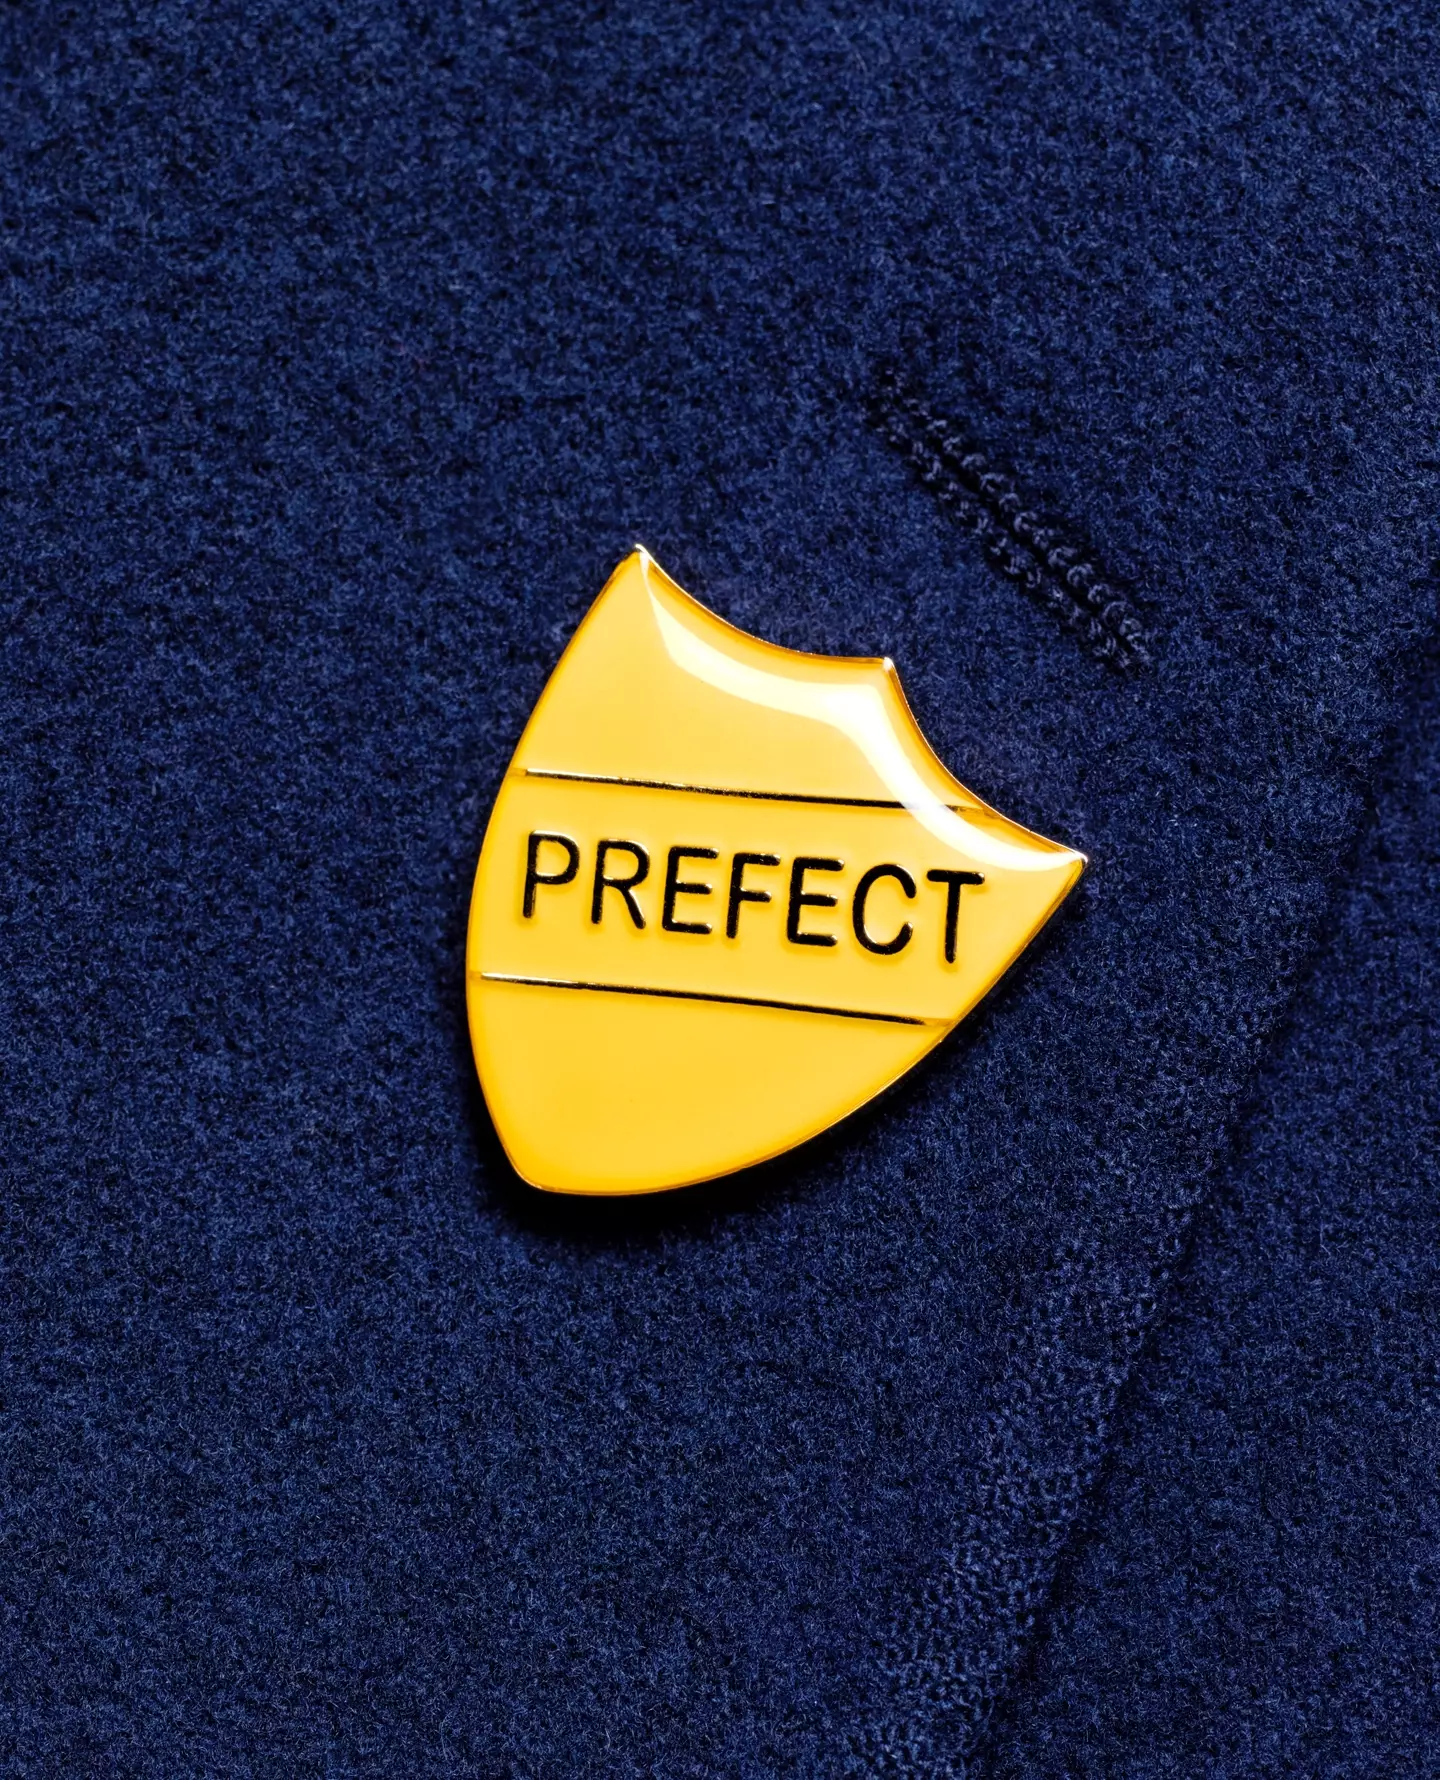 Yep, non-magical schools have prefects too.